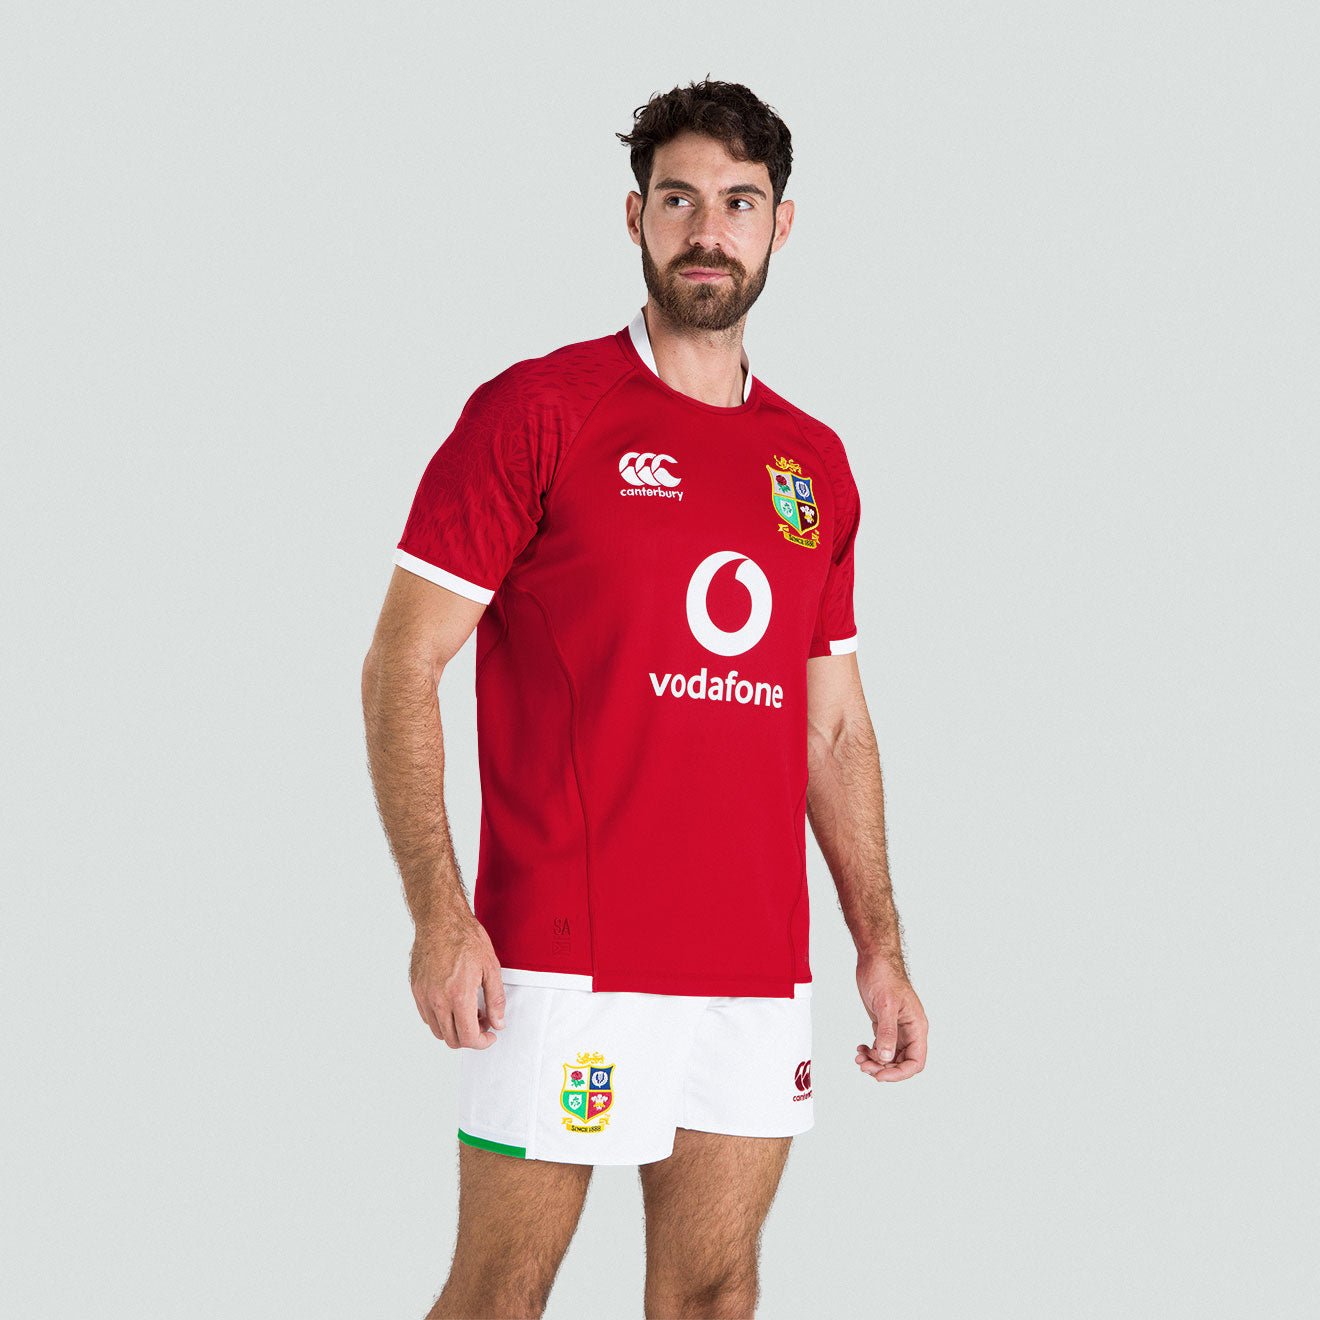 lions rugby store